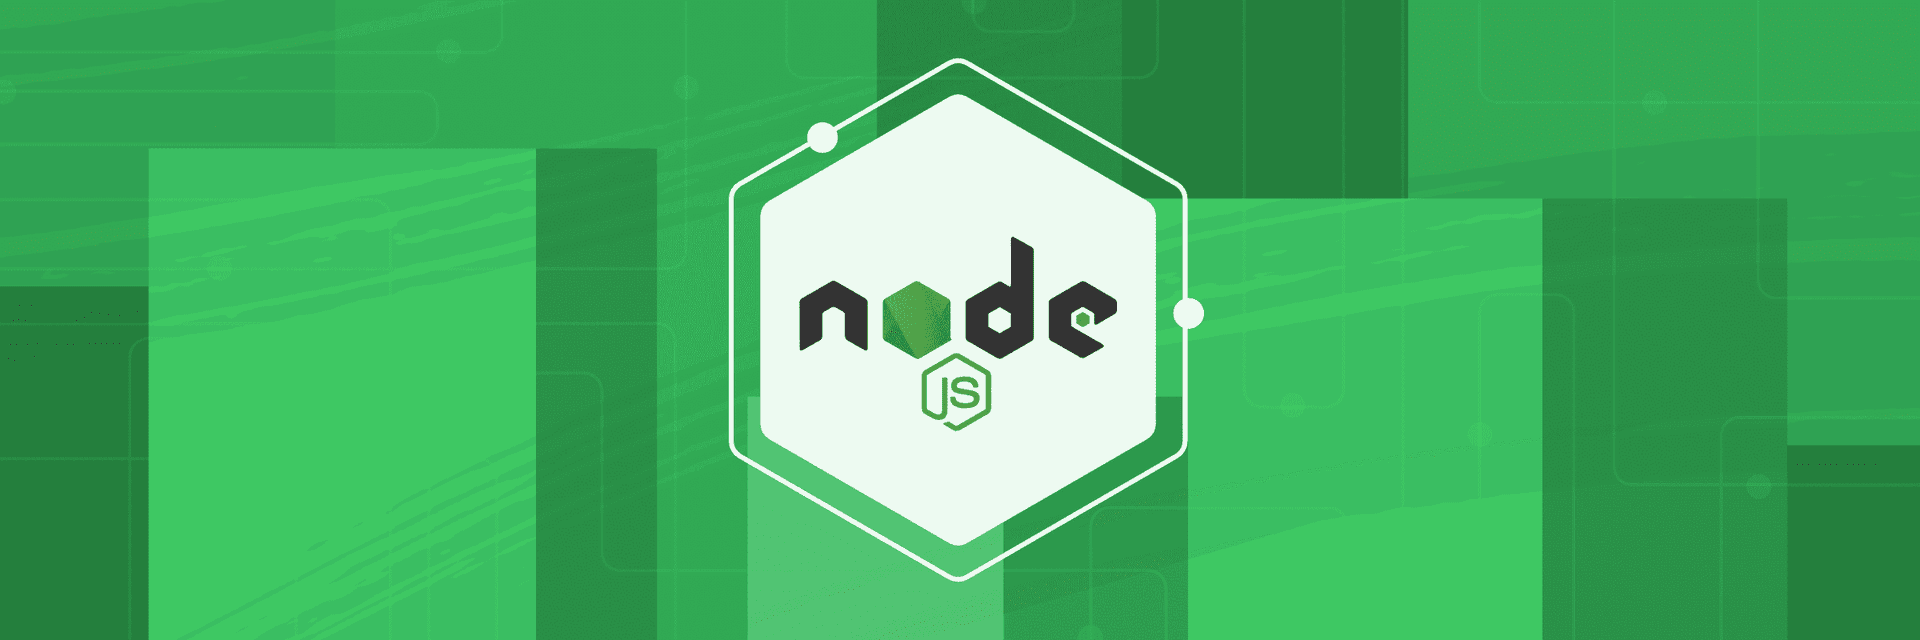 How to automate tests and deployments of Node.js apps with Buddy